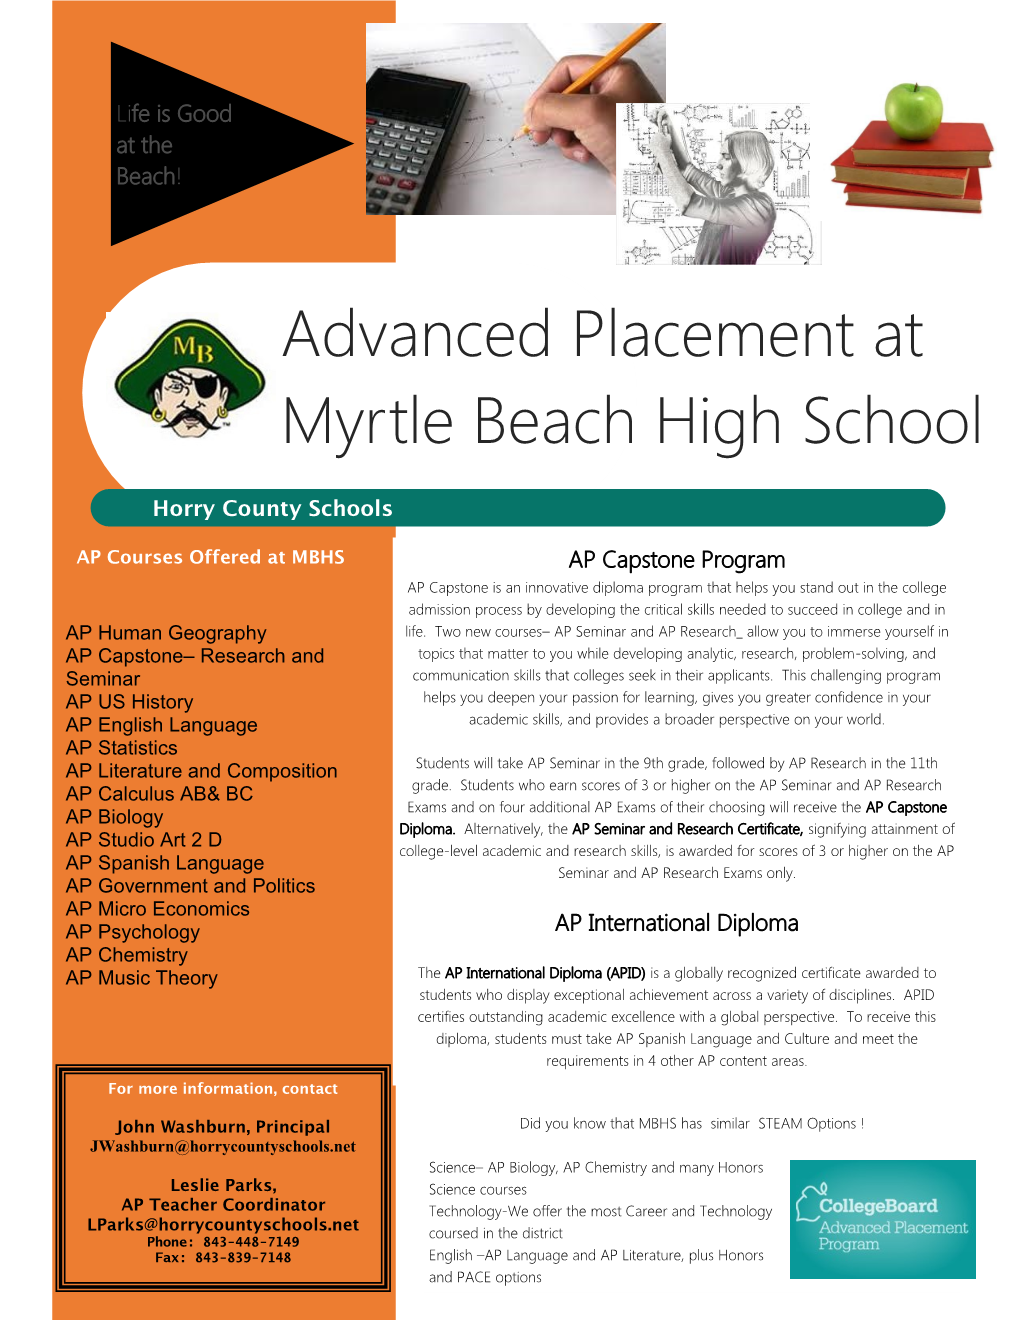 Advanced Placement at Myrtle Beach High School